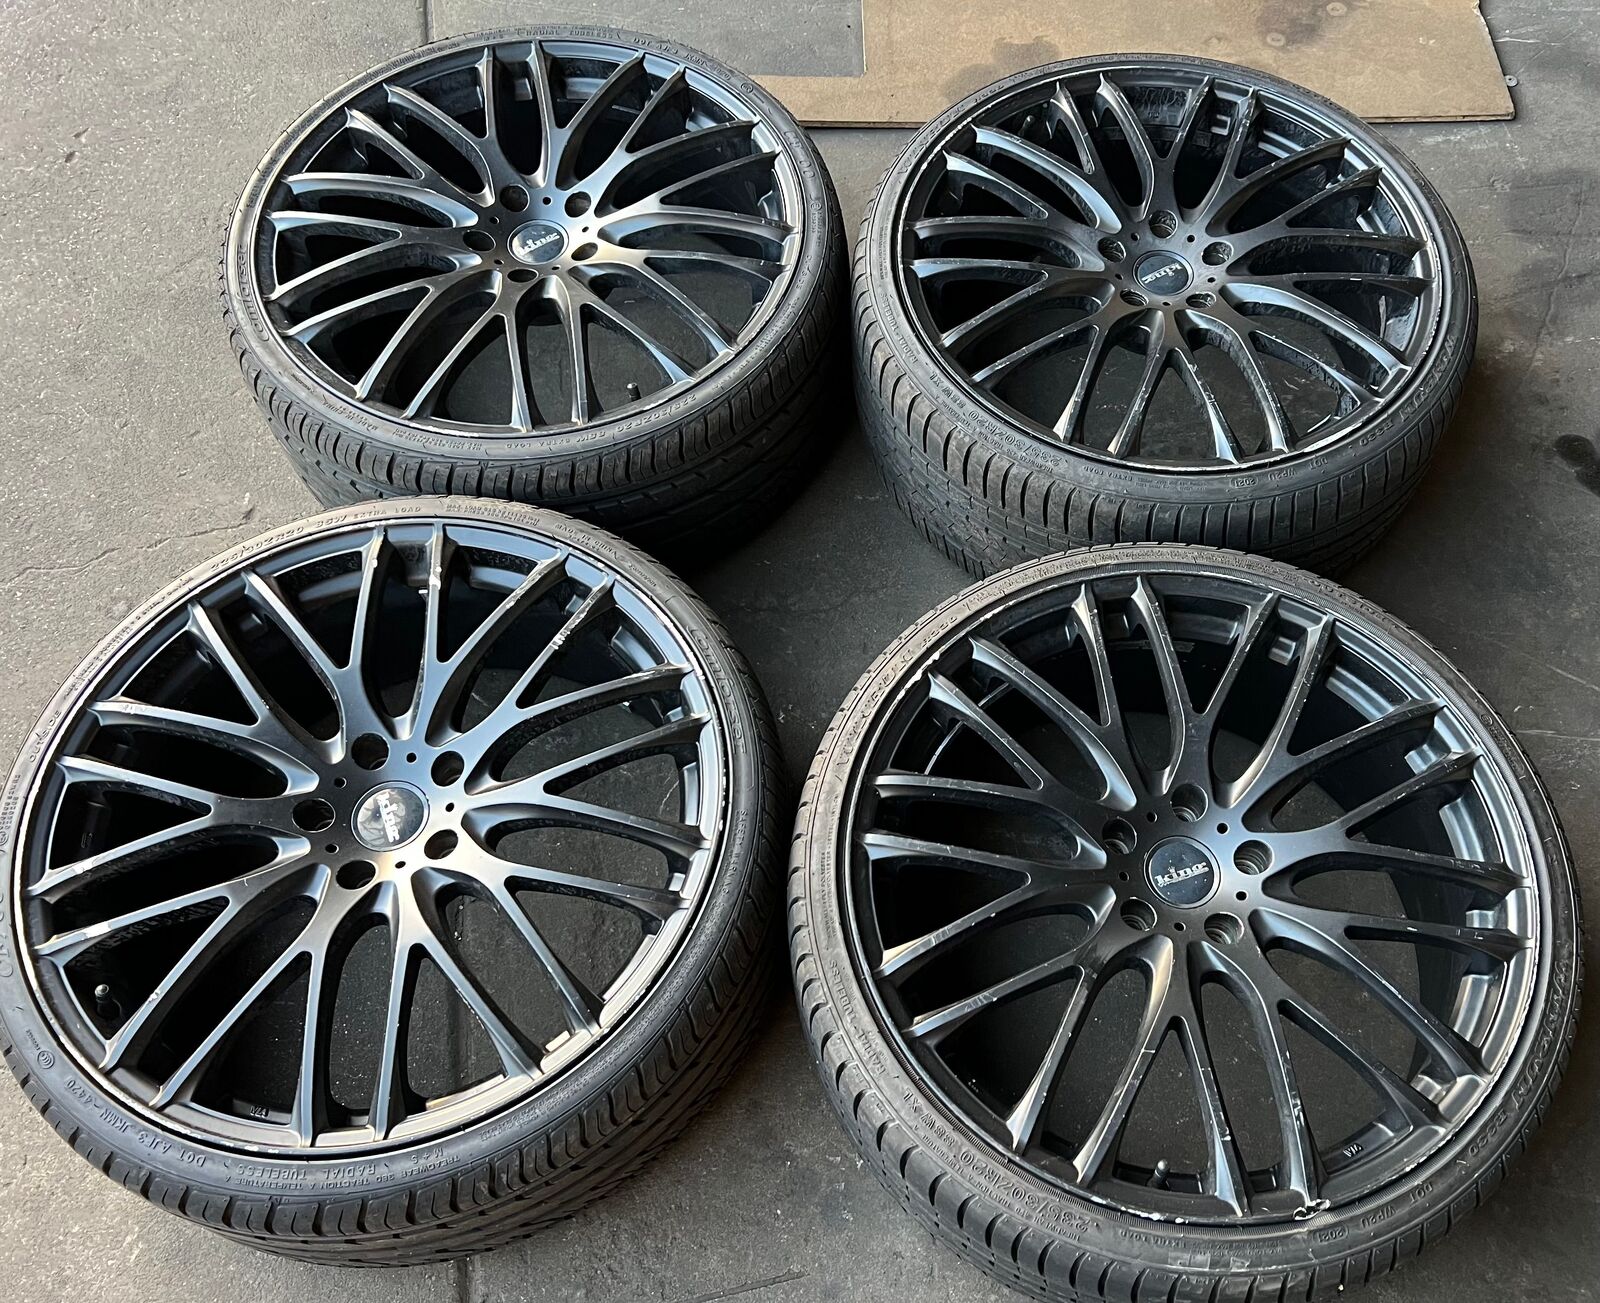 Set of Alloy Wheels to suit HOLDEN COLORADO 2013 ~ 2017